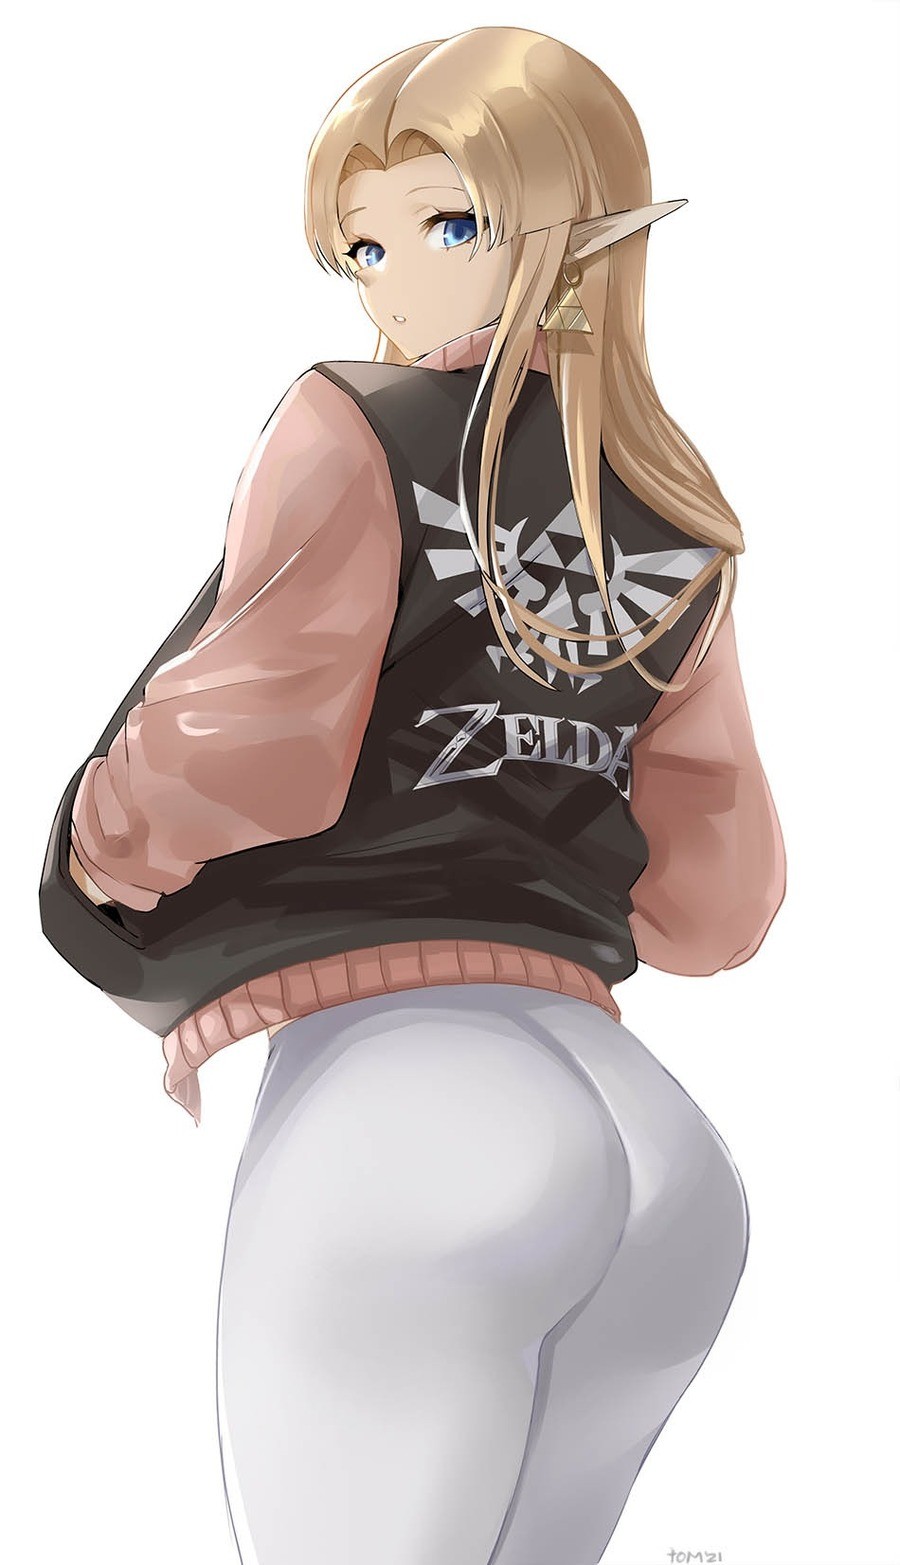 Daily Zelda - 871: Zeldas Jacket. join list: DailyZelda (524 subs)Mention History Source: .. We really gonna be horny on main? hell yeah